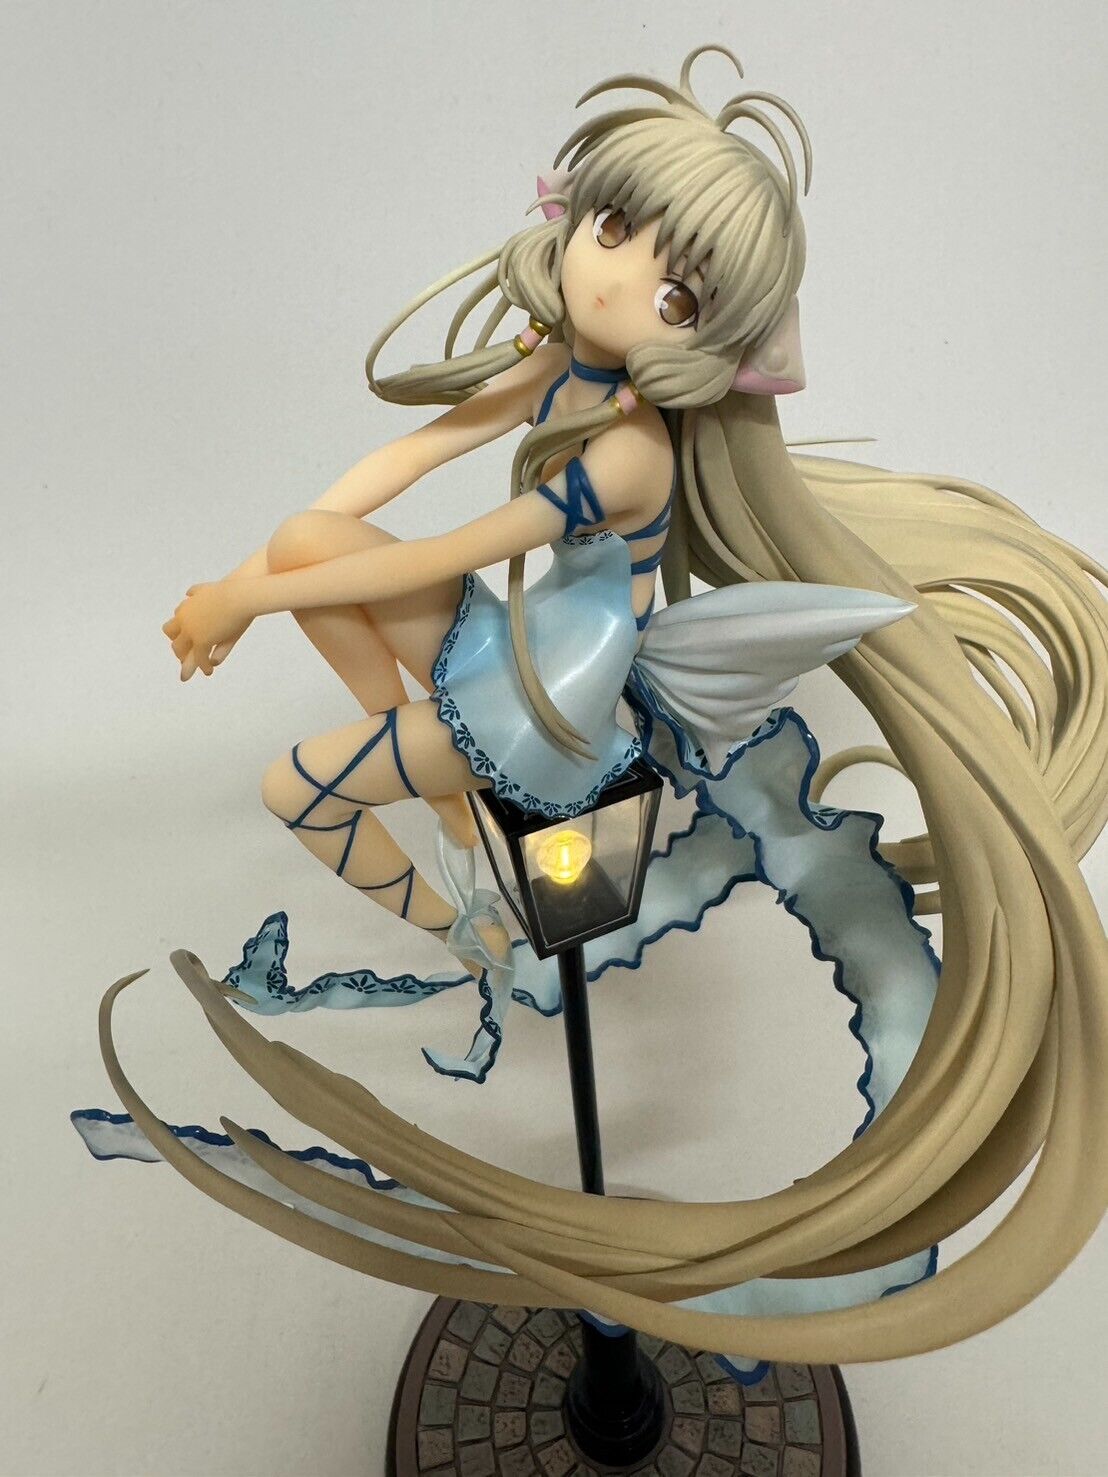 [USED] Hobby Max Japan Chobits Chii 1/7 Scale Figure 390mm Japan